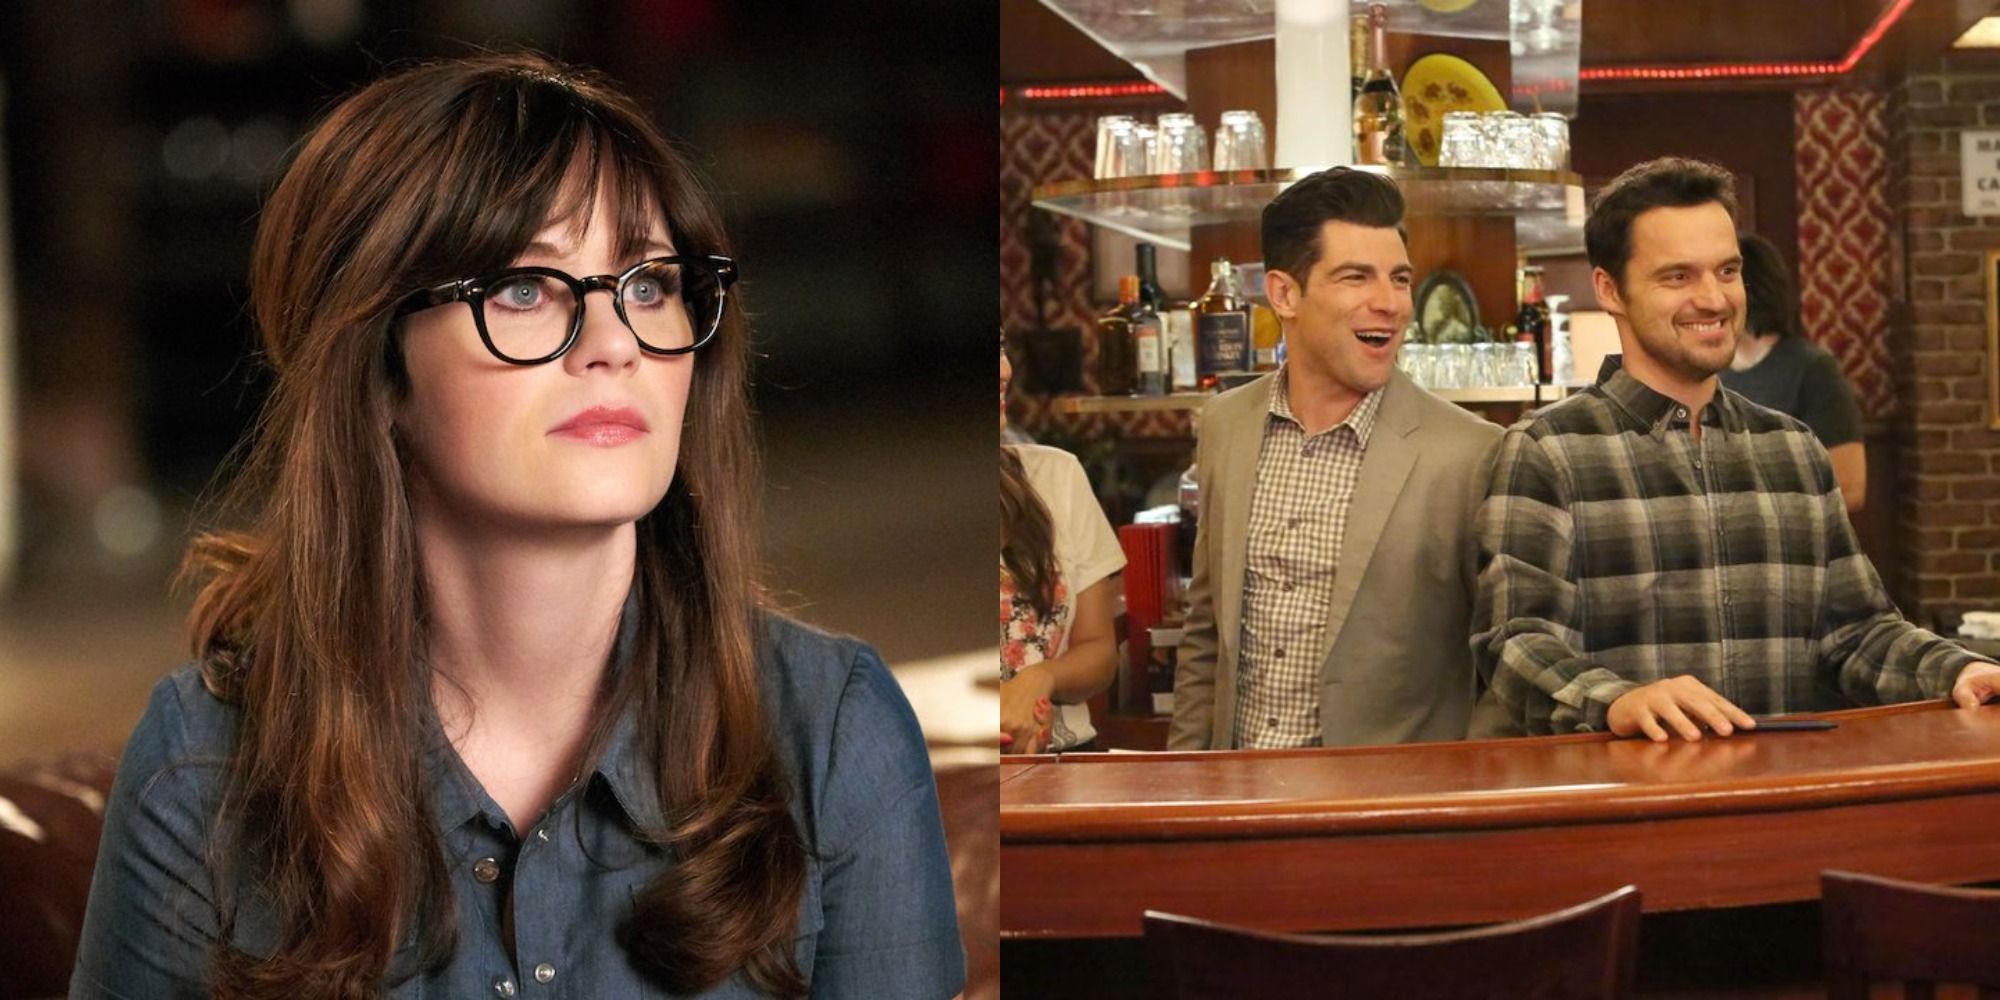 Split image showing Jess looking to the distance, and Nick and Schmidt smiling while standing behind a bar